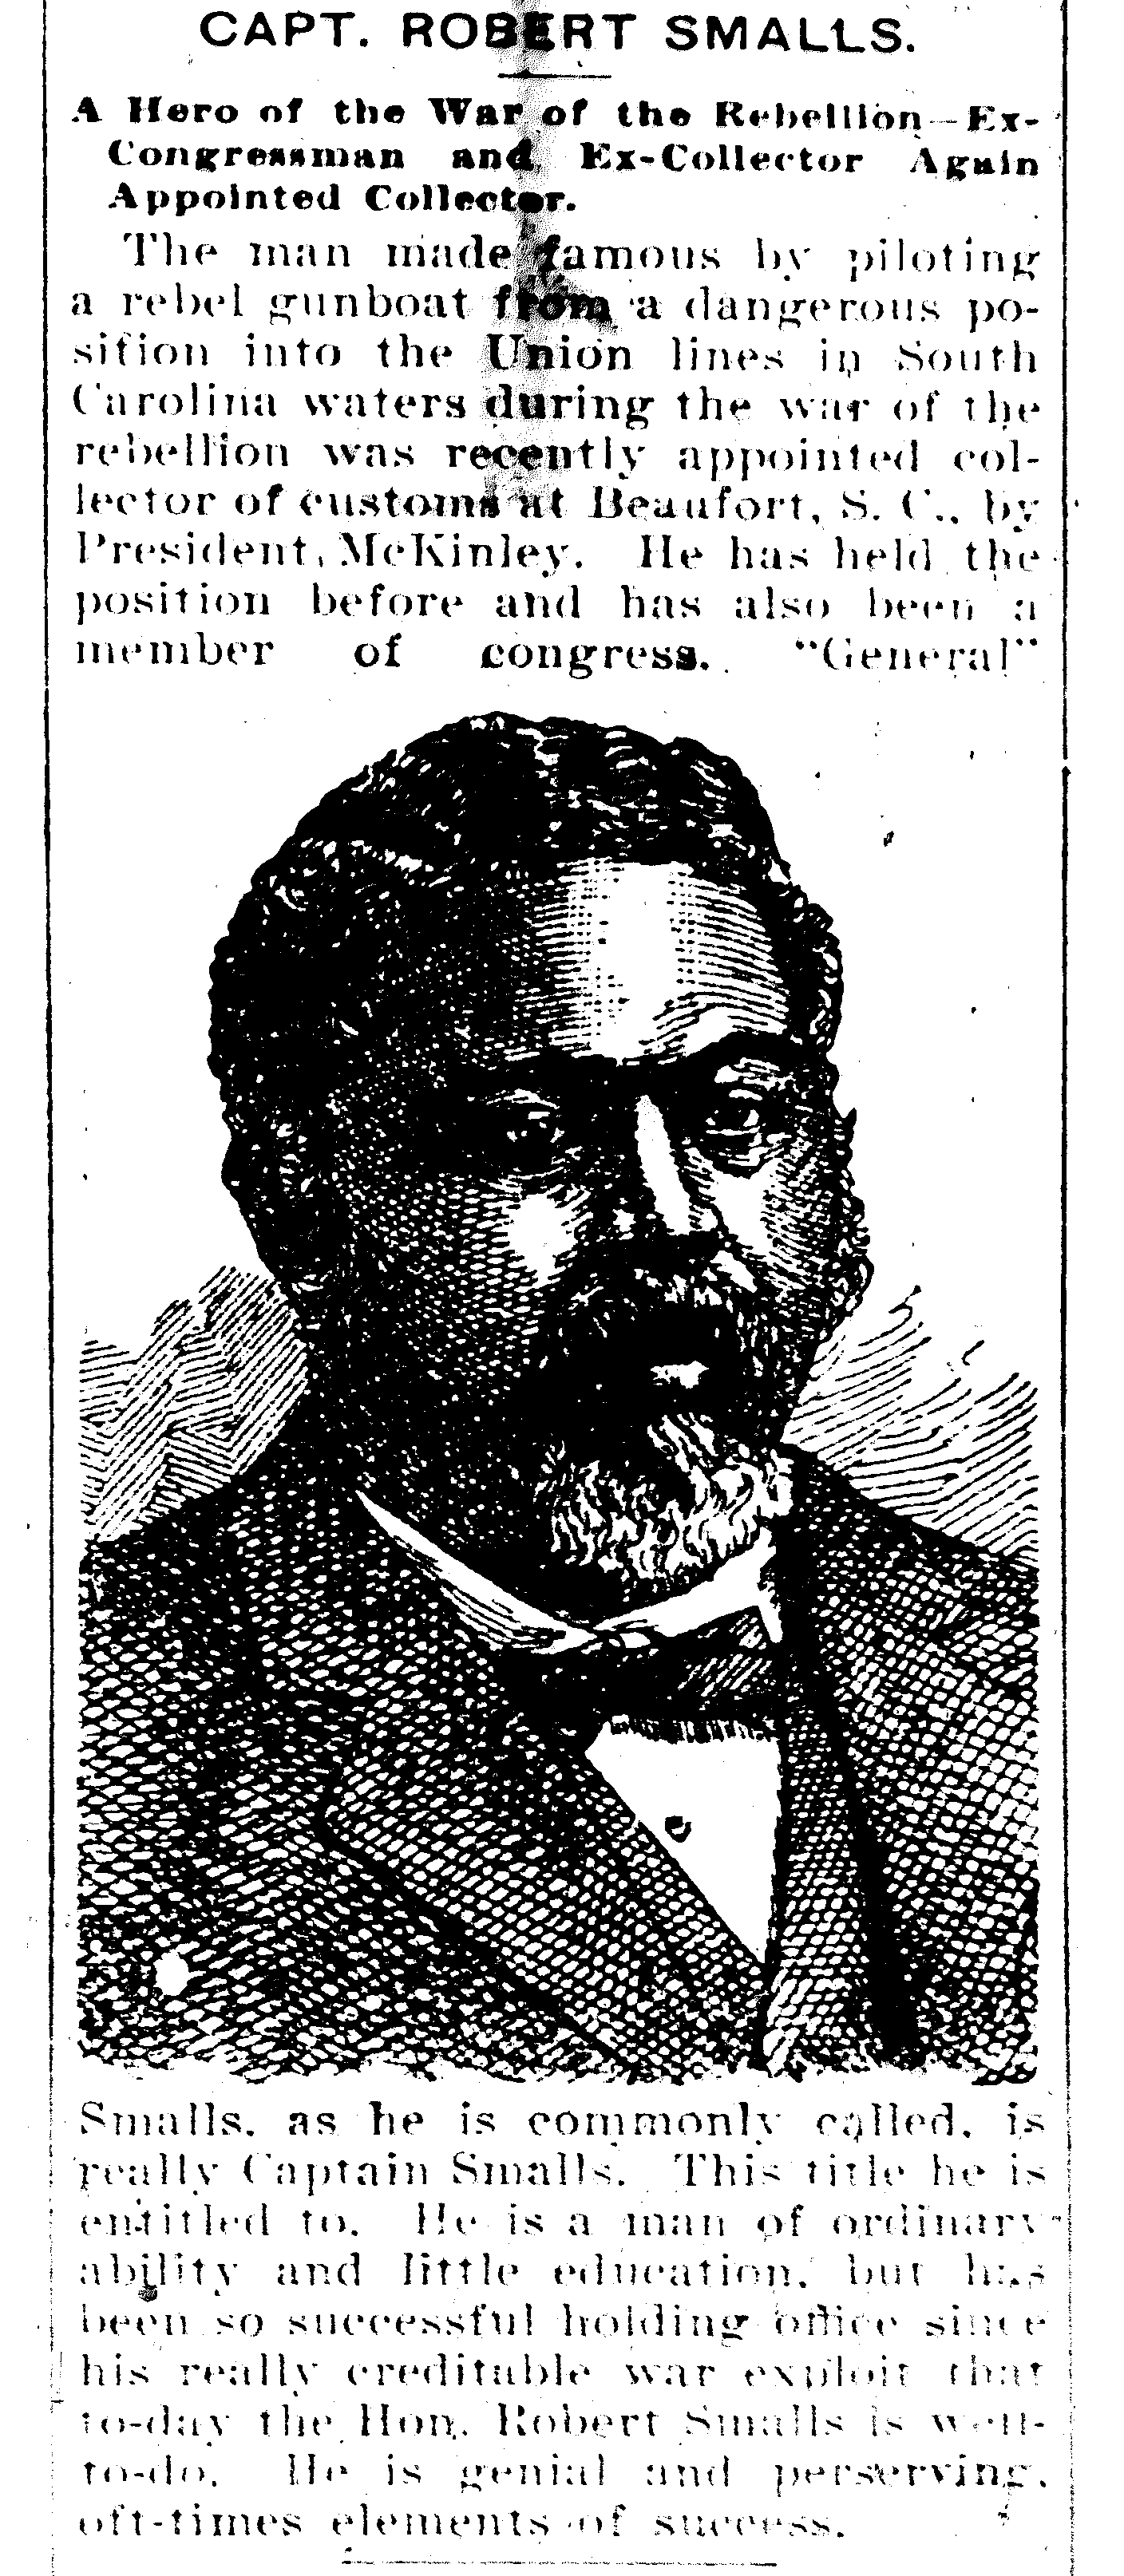 Robert Smalls' reappointment is announced in the Cleveland Gazette.